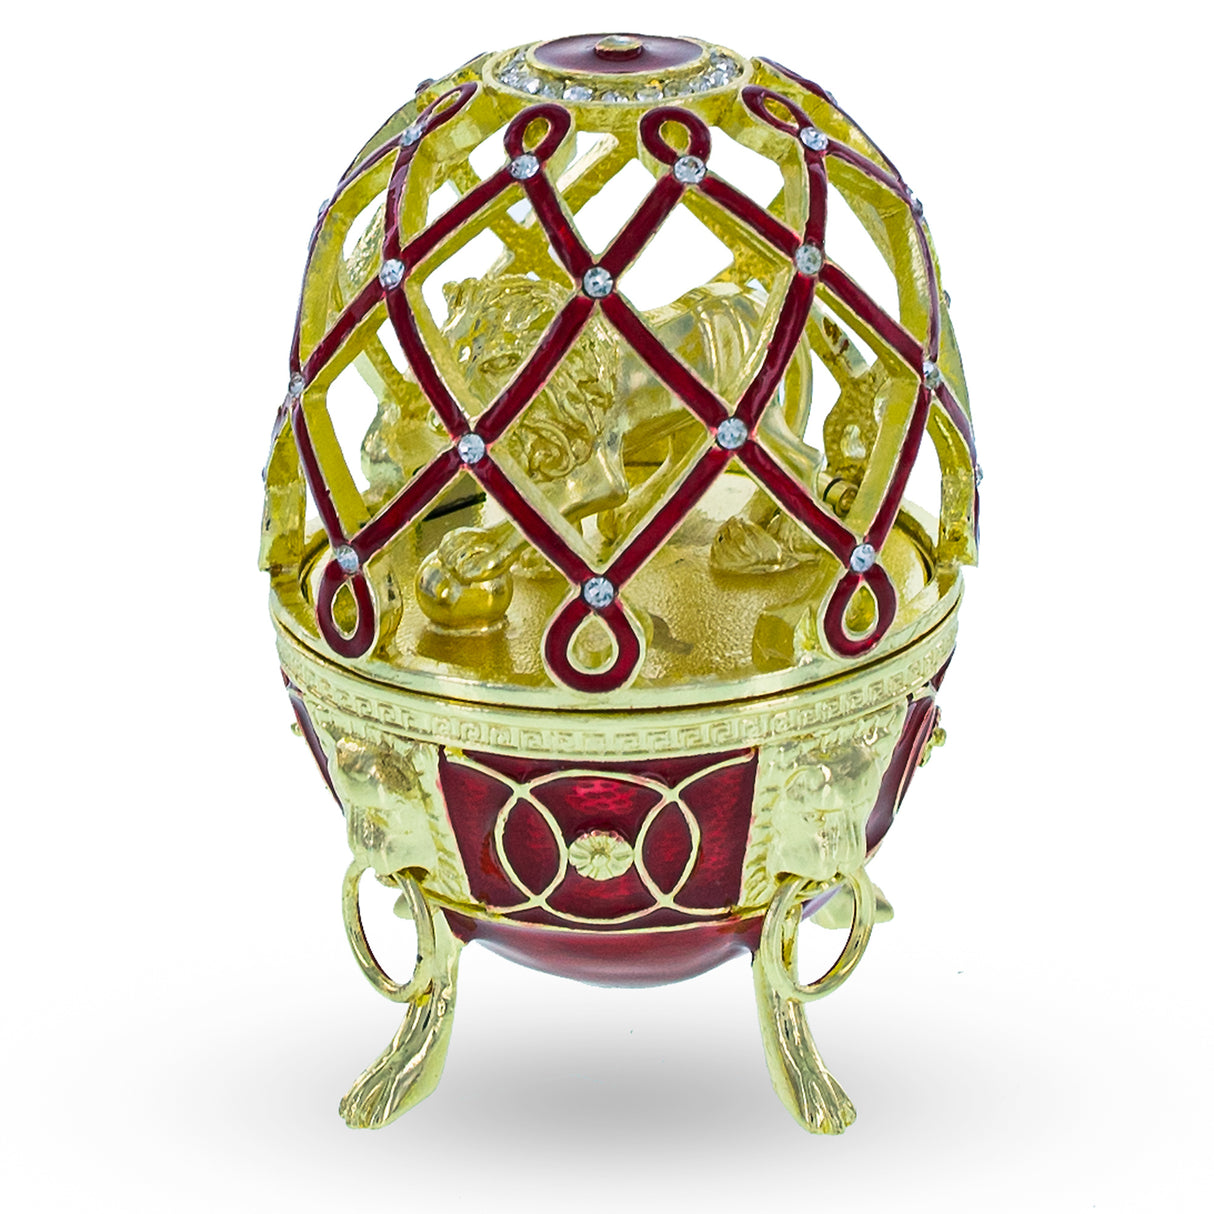 Pewter Golden Lion in the Jeweled Cage Egg Figurine in Red color Oval